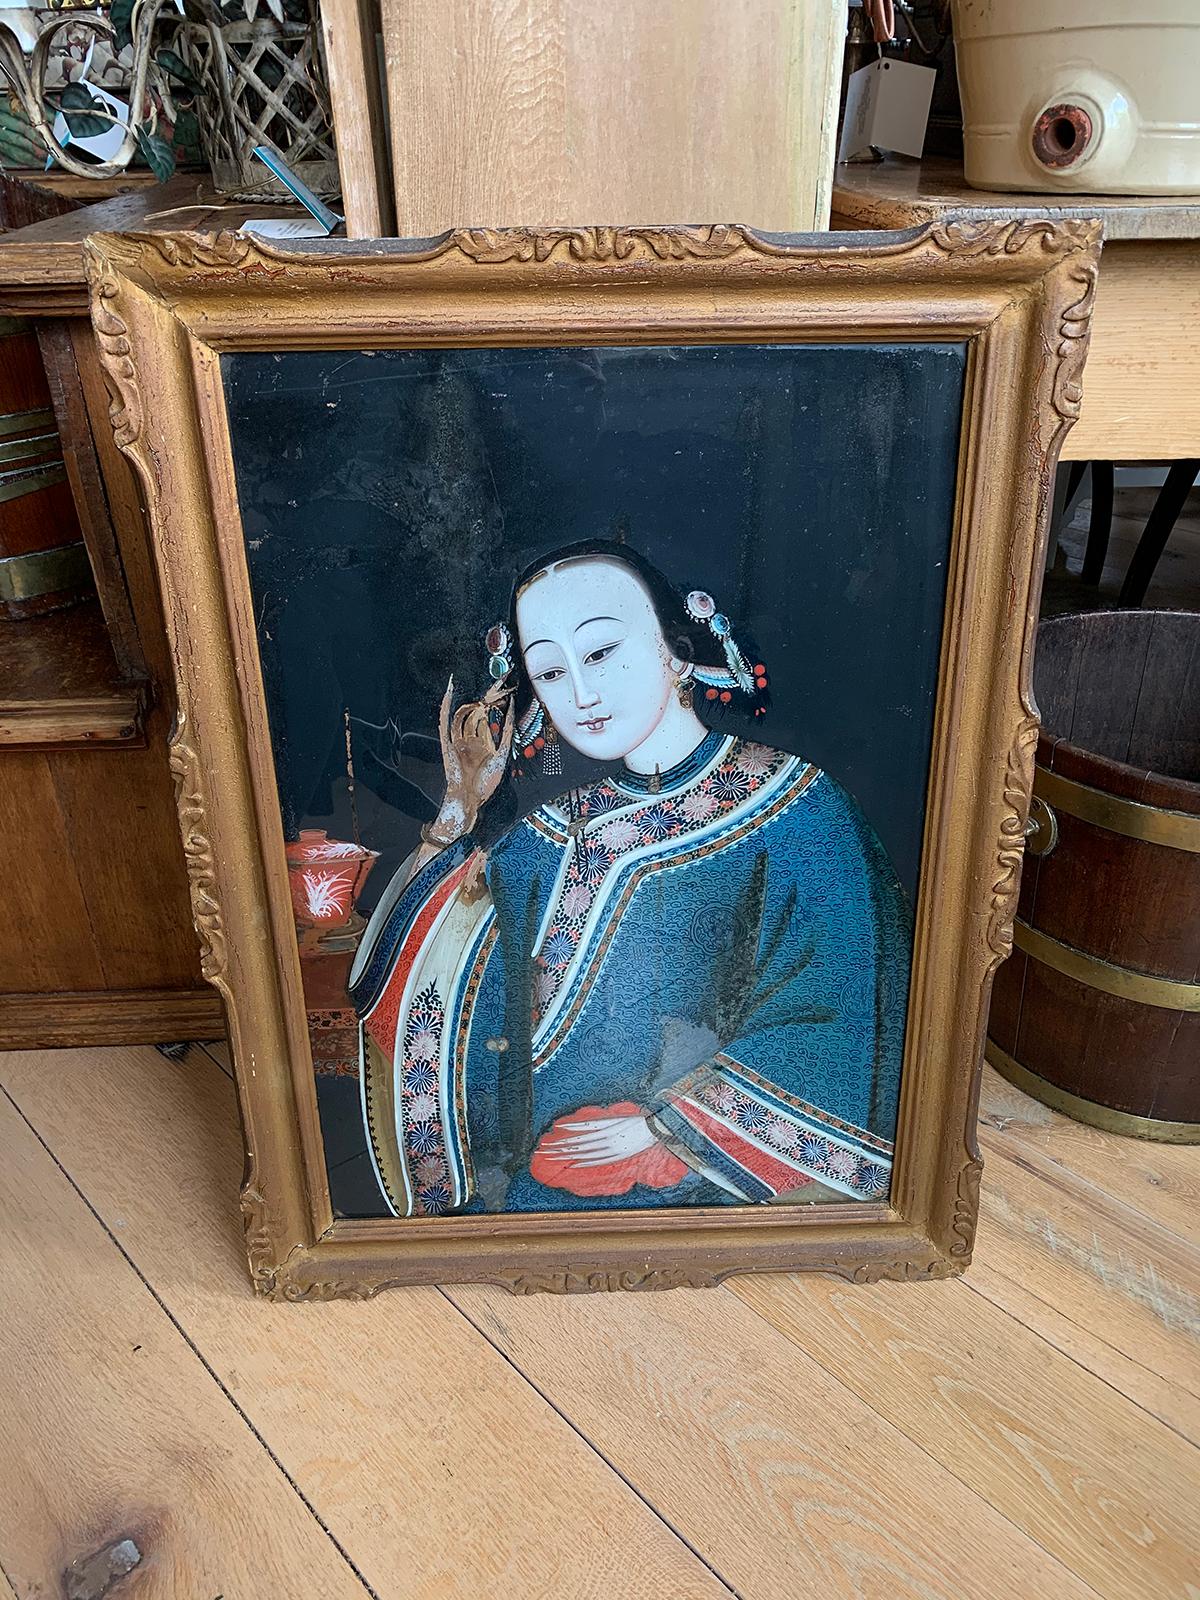 19th century to turn of the century Chinese framed portrait painting of woman.